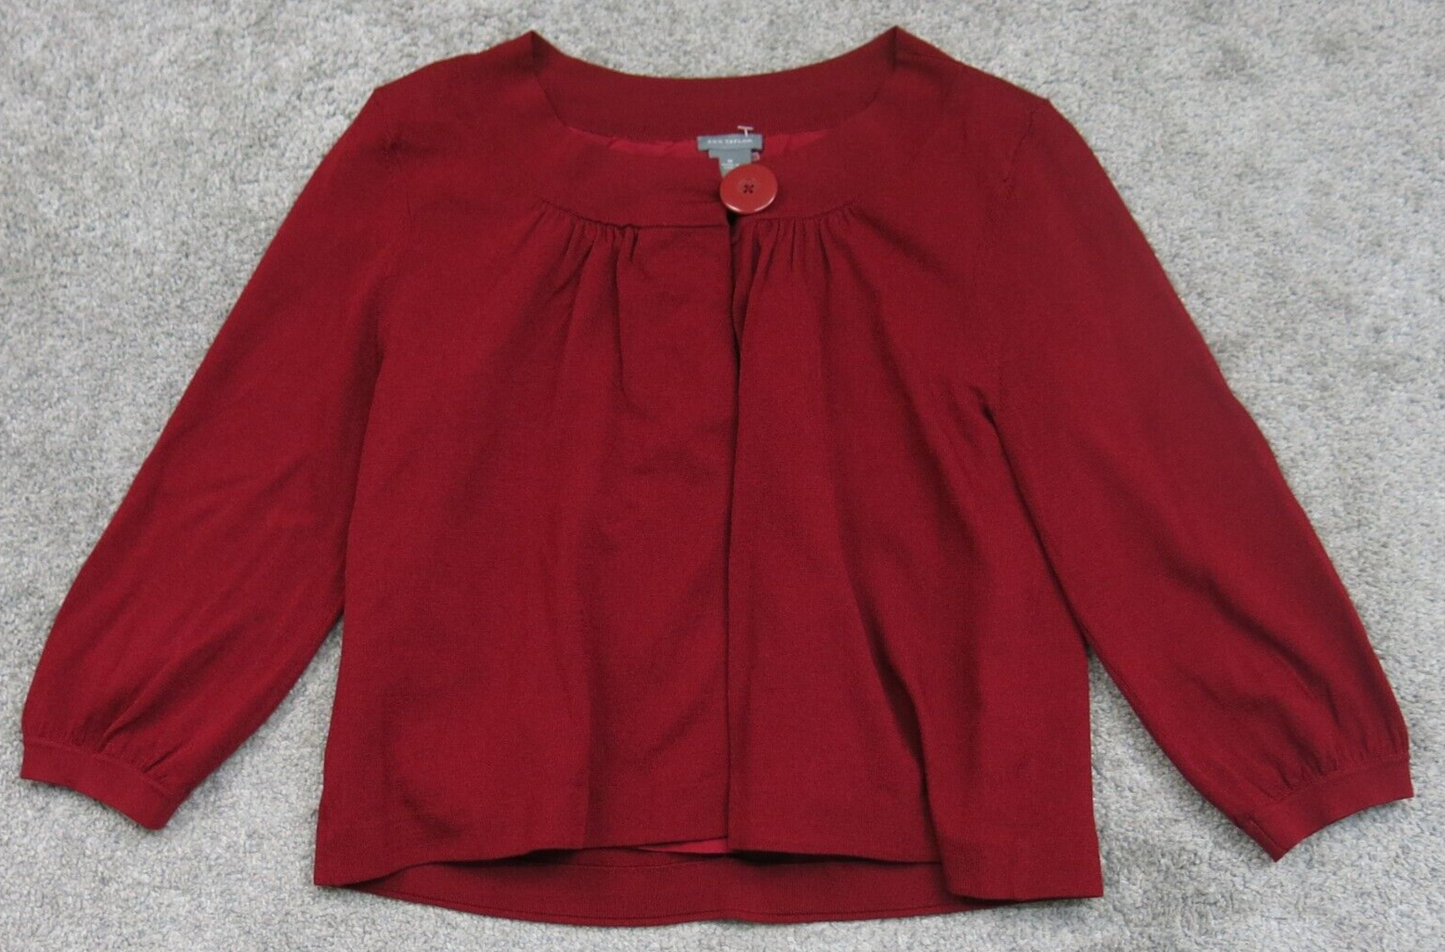 Ann Taylor Womens Casual Knit Blouse Top 3/4 Sleeves Maroon Size Medium